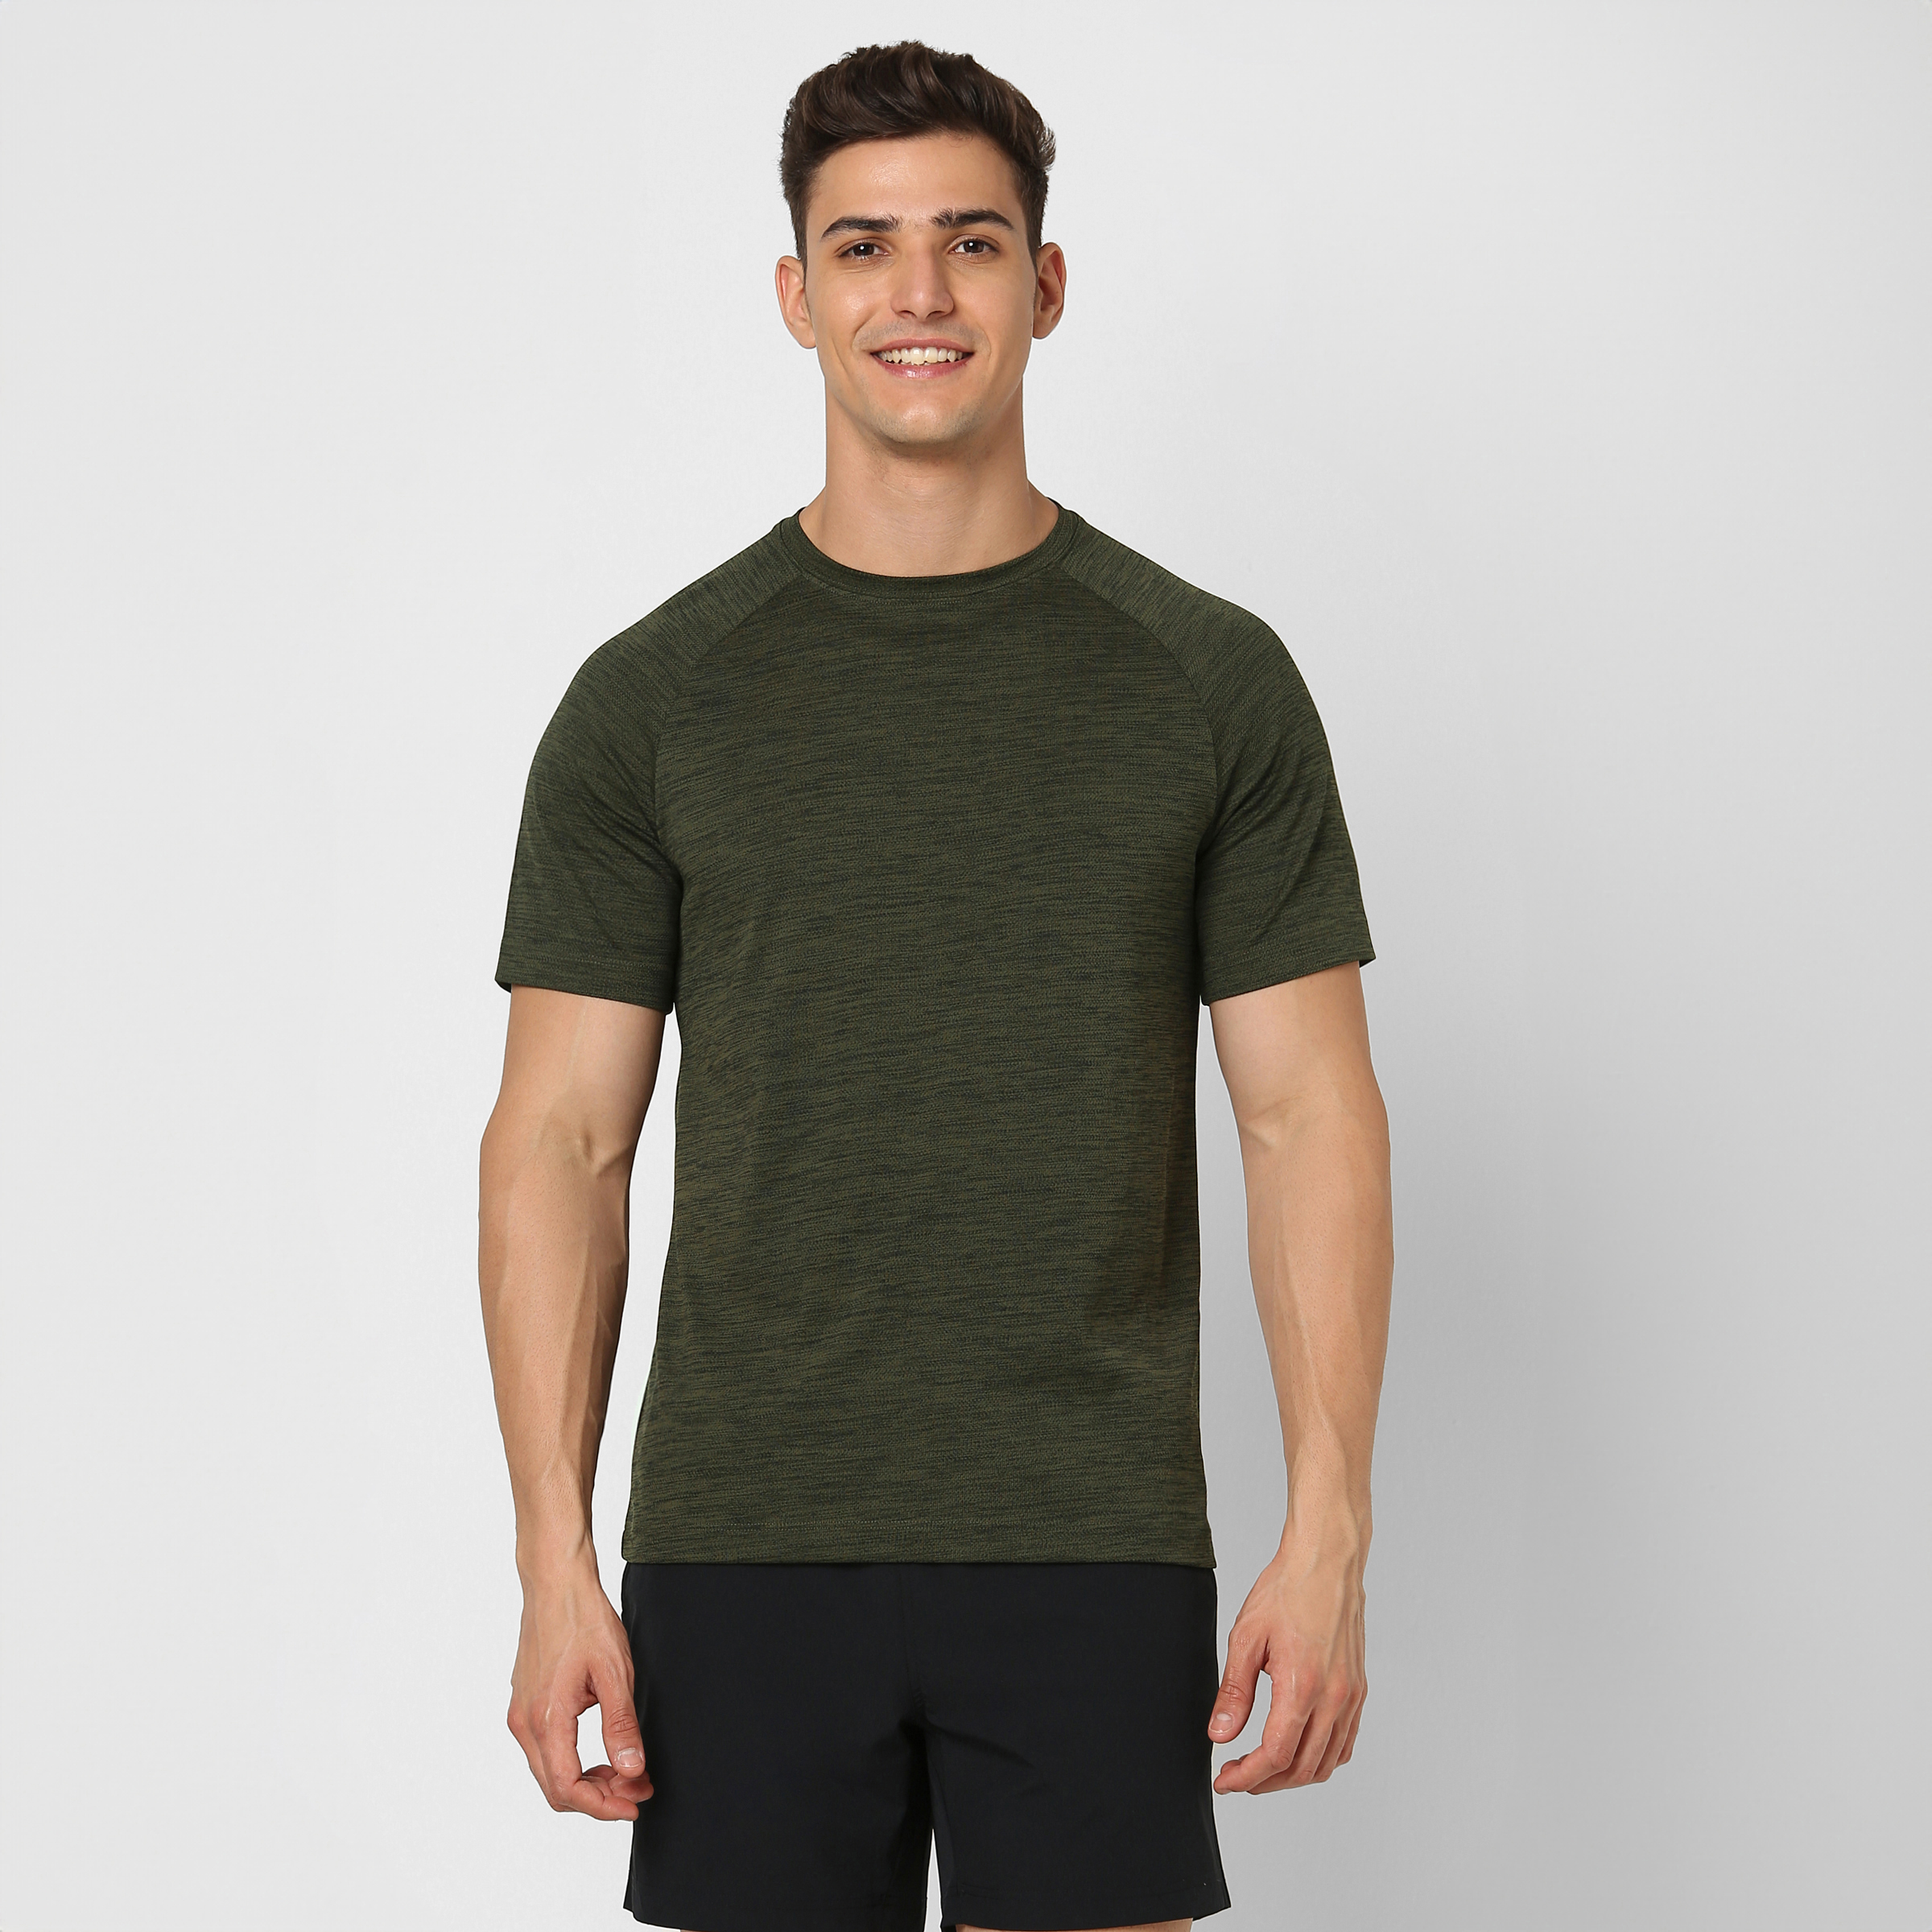 Flex Tee Army Green front on model